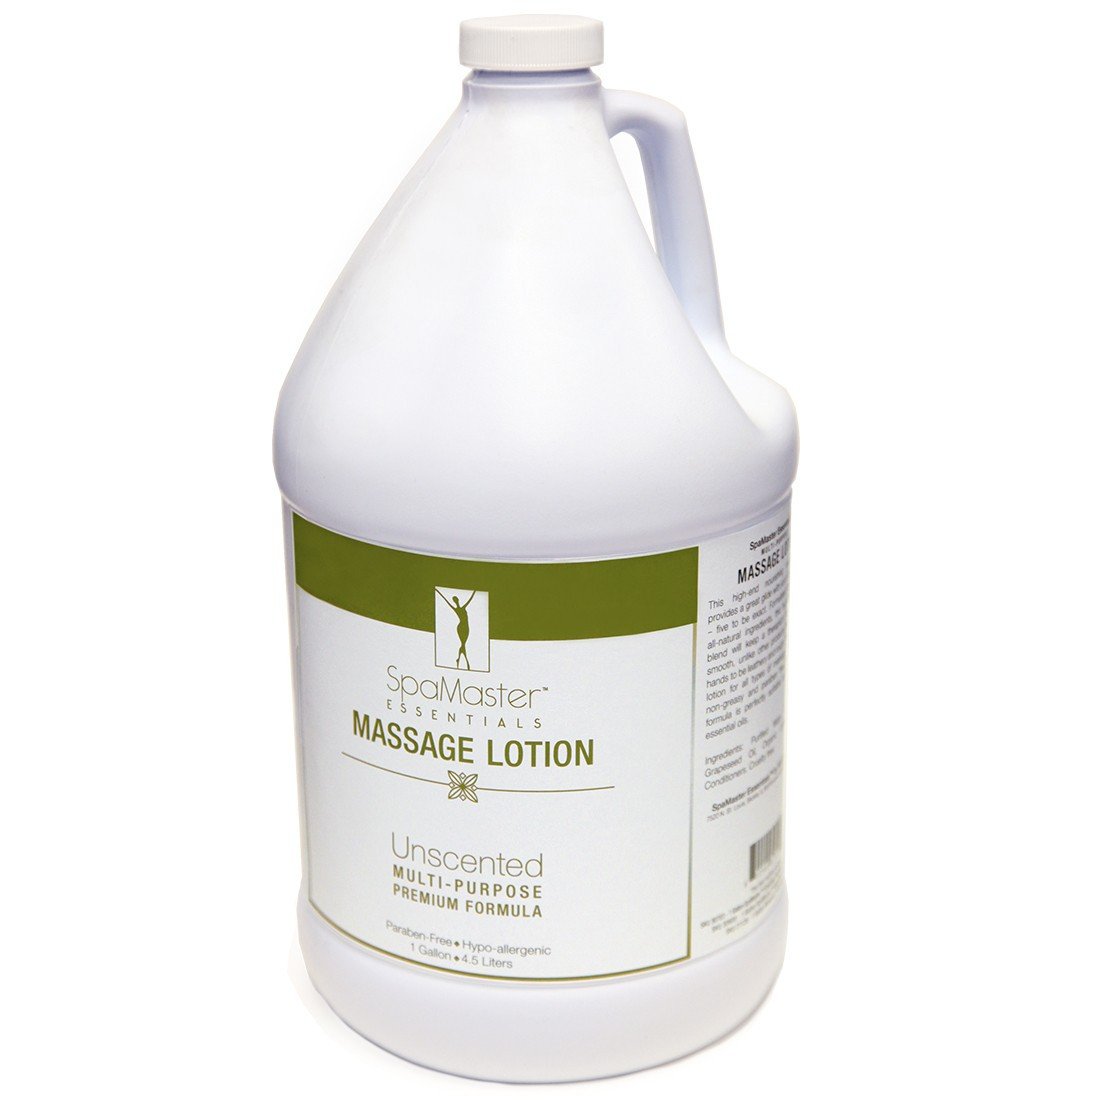 Organic, Unscented, Vitamin-Rich and Water-Soluble Massage Lotion - 1 Gallon